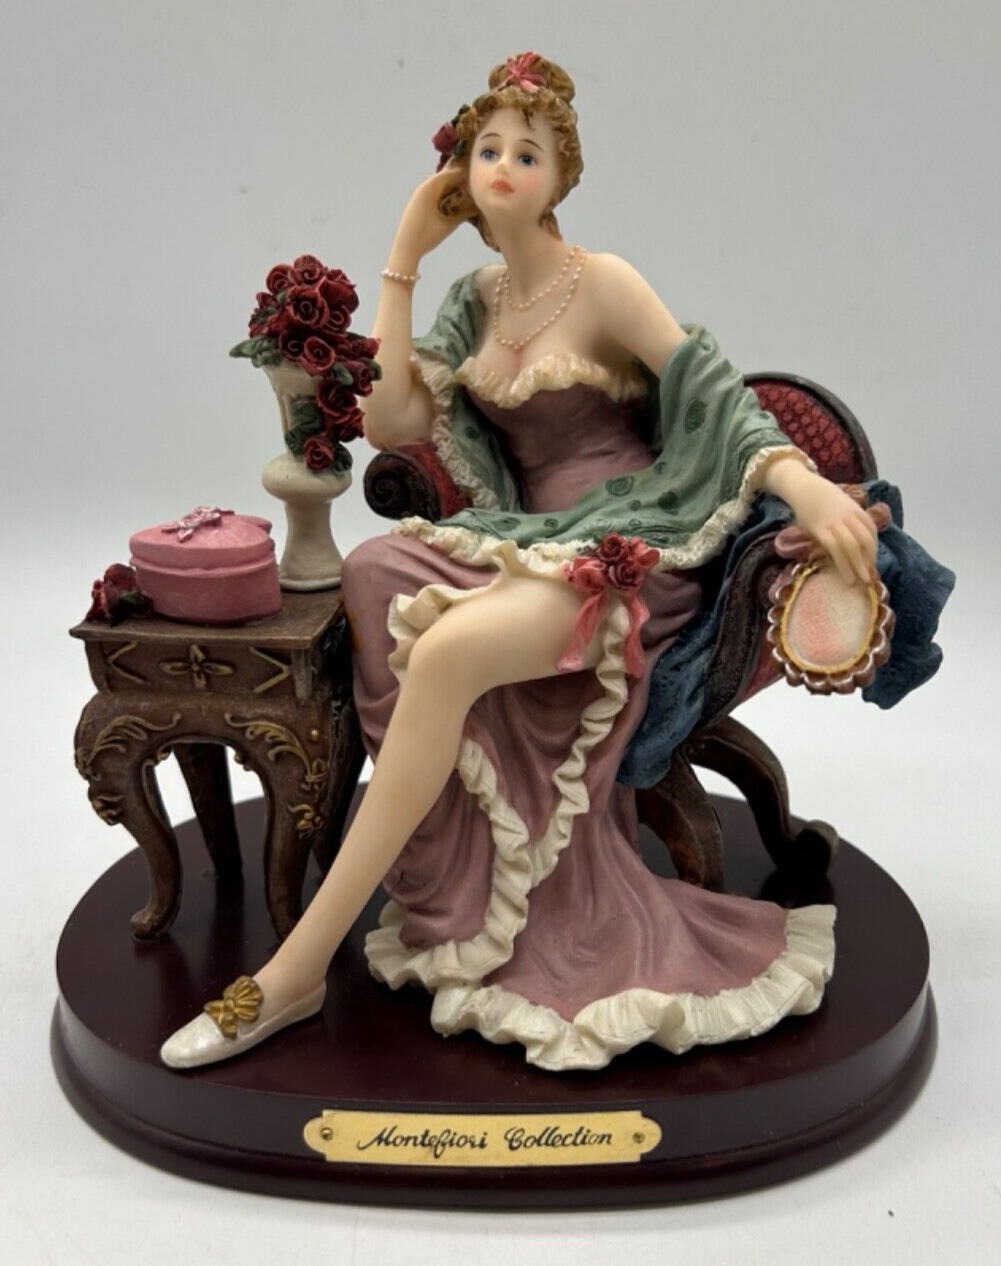 New Gorgeous Elegant Seated Lady with Roses - Montefiore Collection Figurine